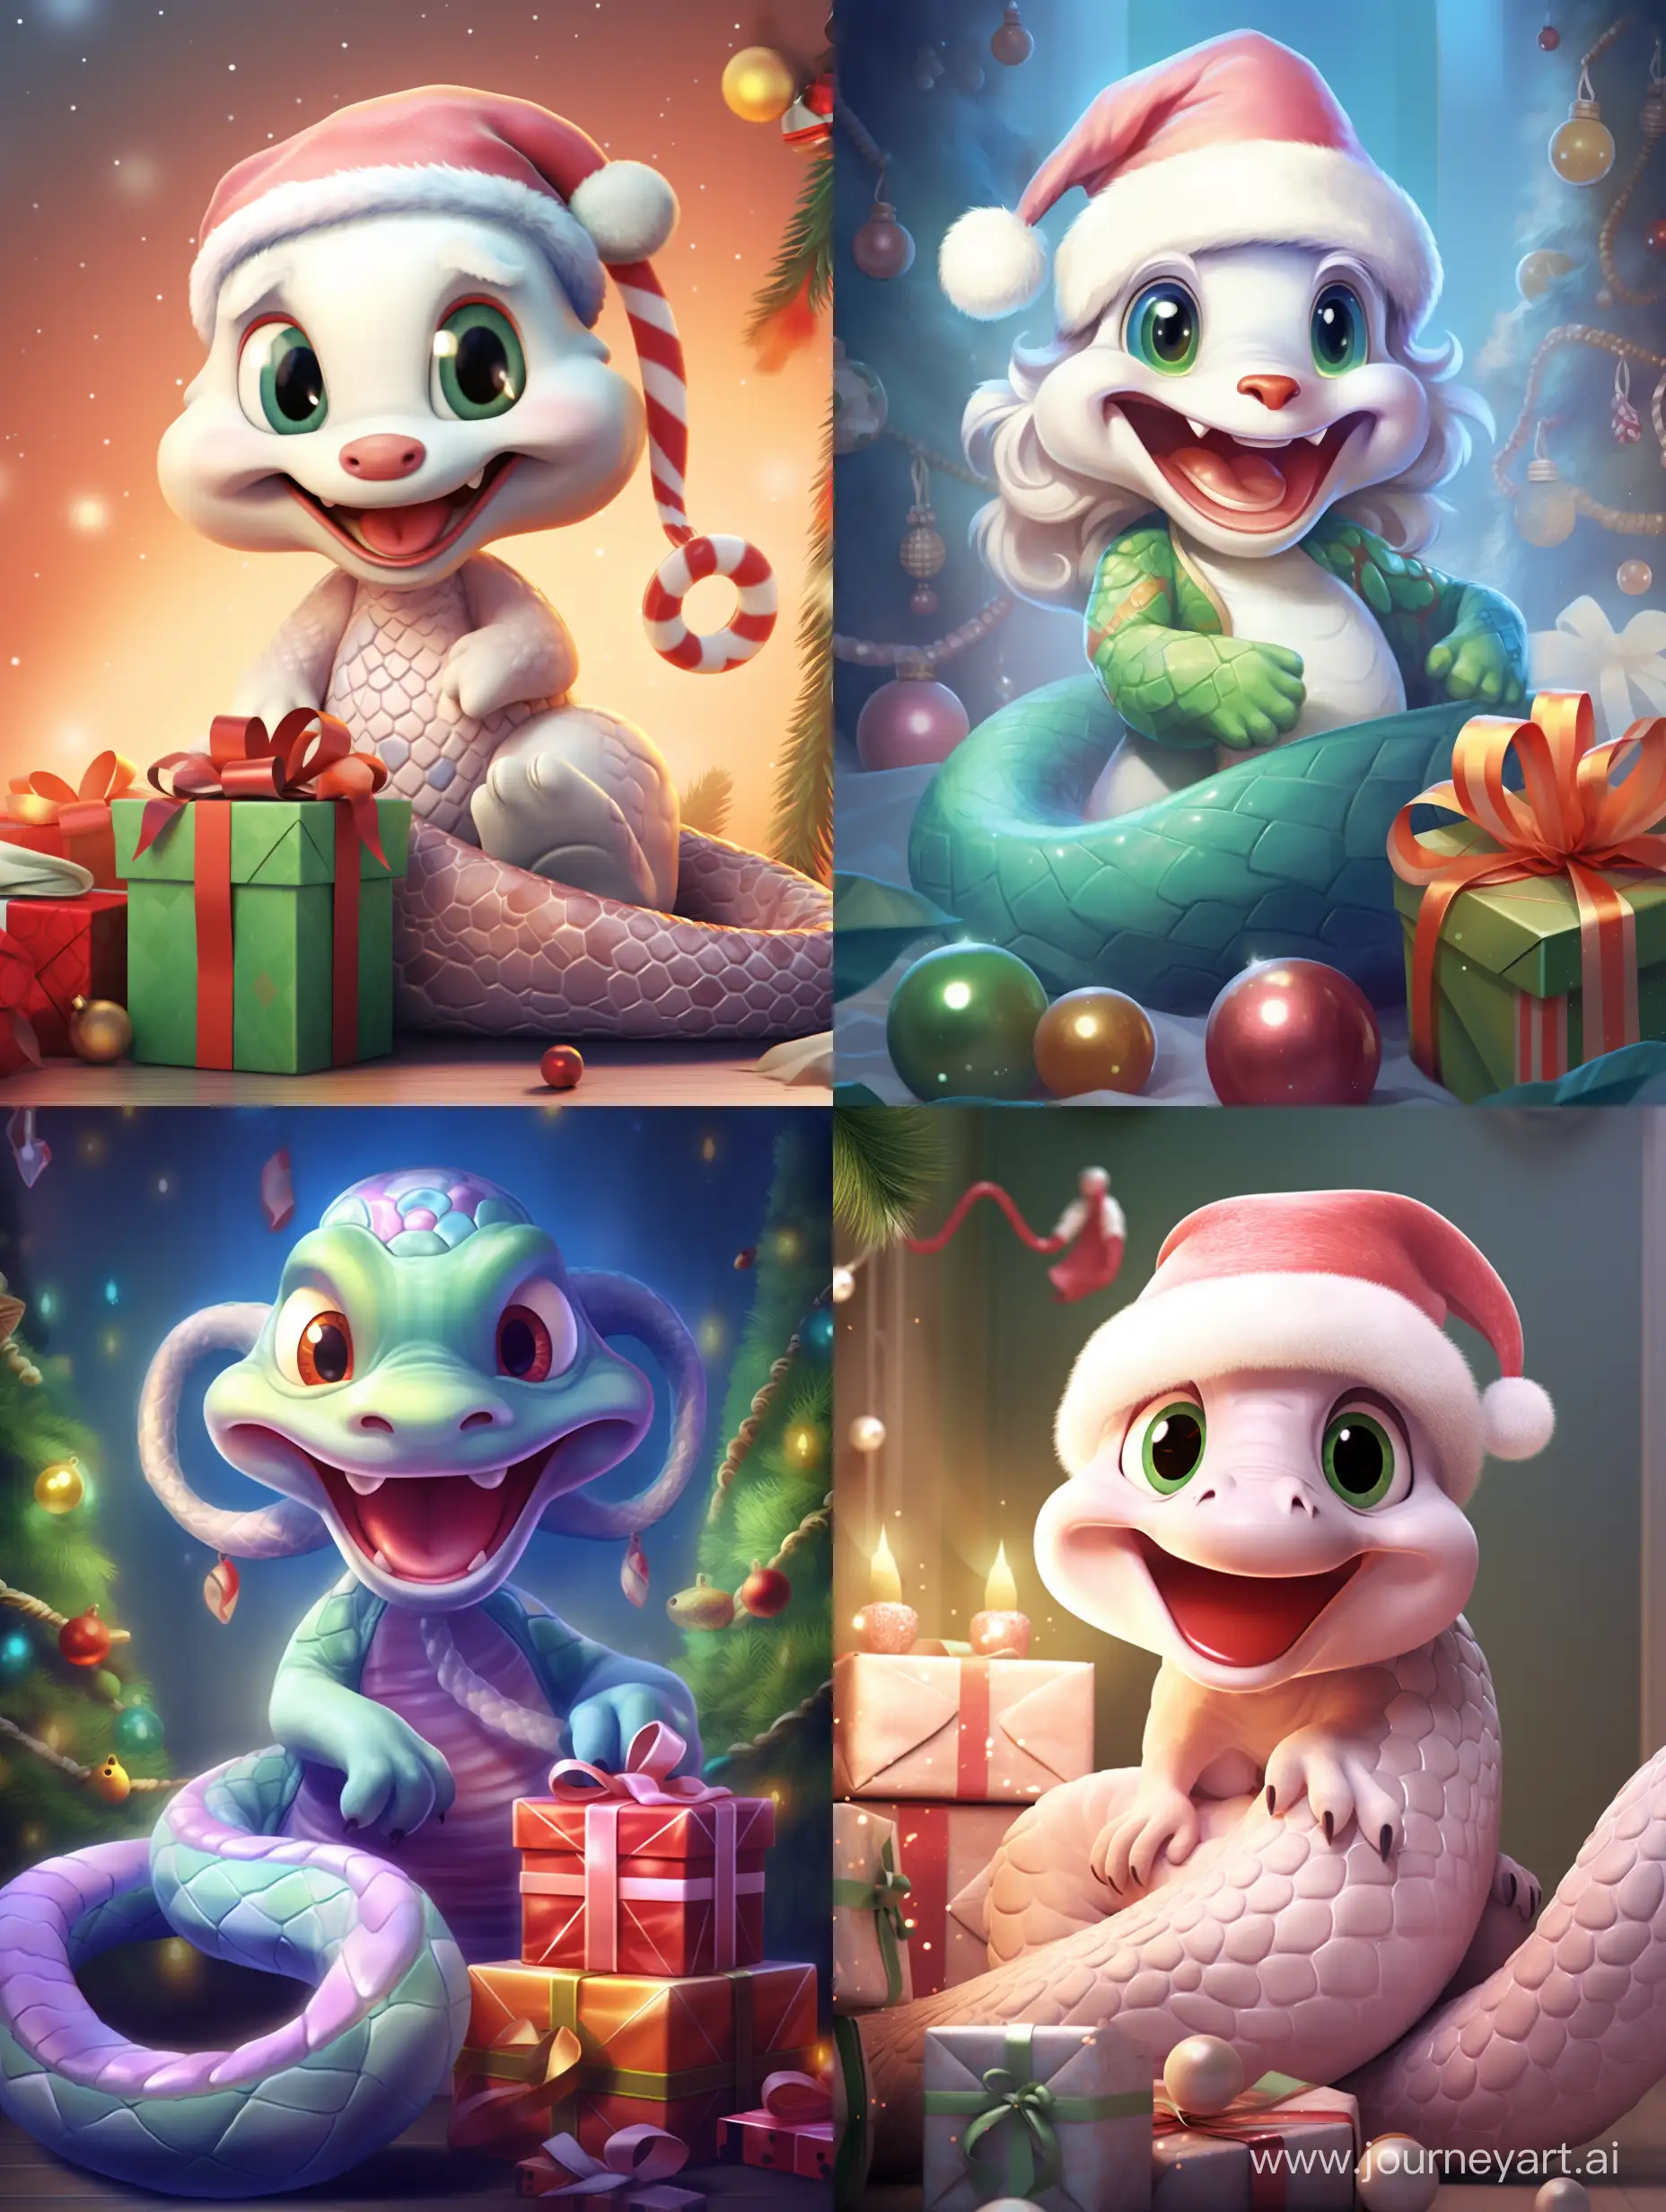 Adorable-Disney-Jr-PixarStyle-Snake-Celebrating-Christmas-with-Santa-Hat-Gifts-and-Tree